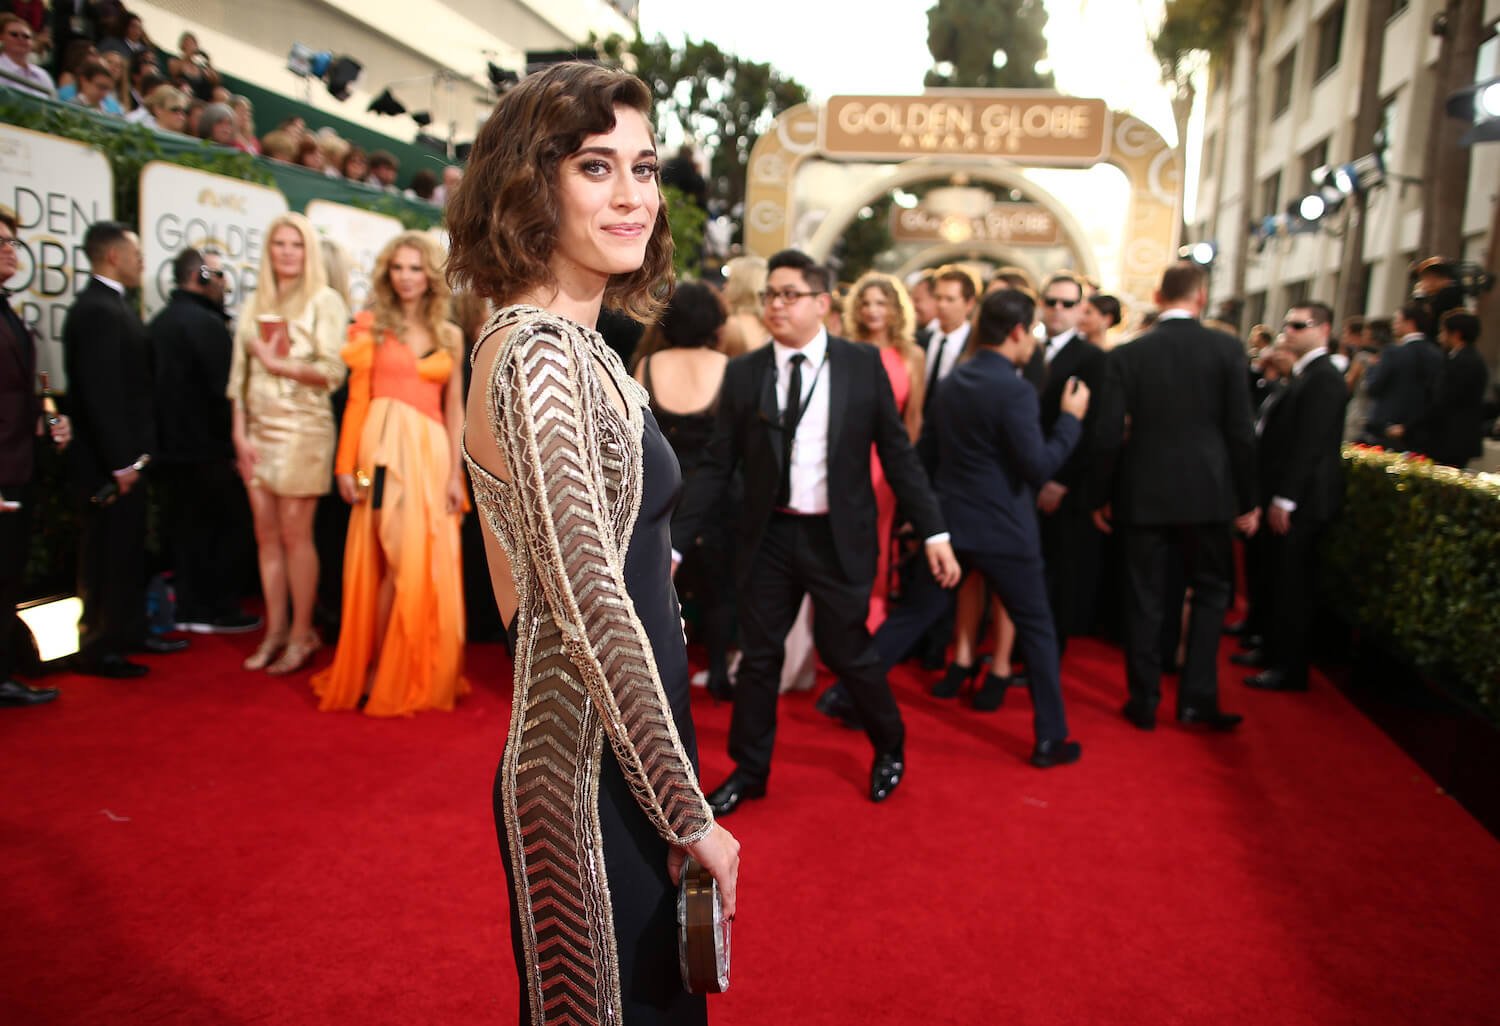 Lizzy Caplan looking over her shoulder at a red carpet event